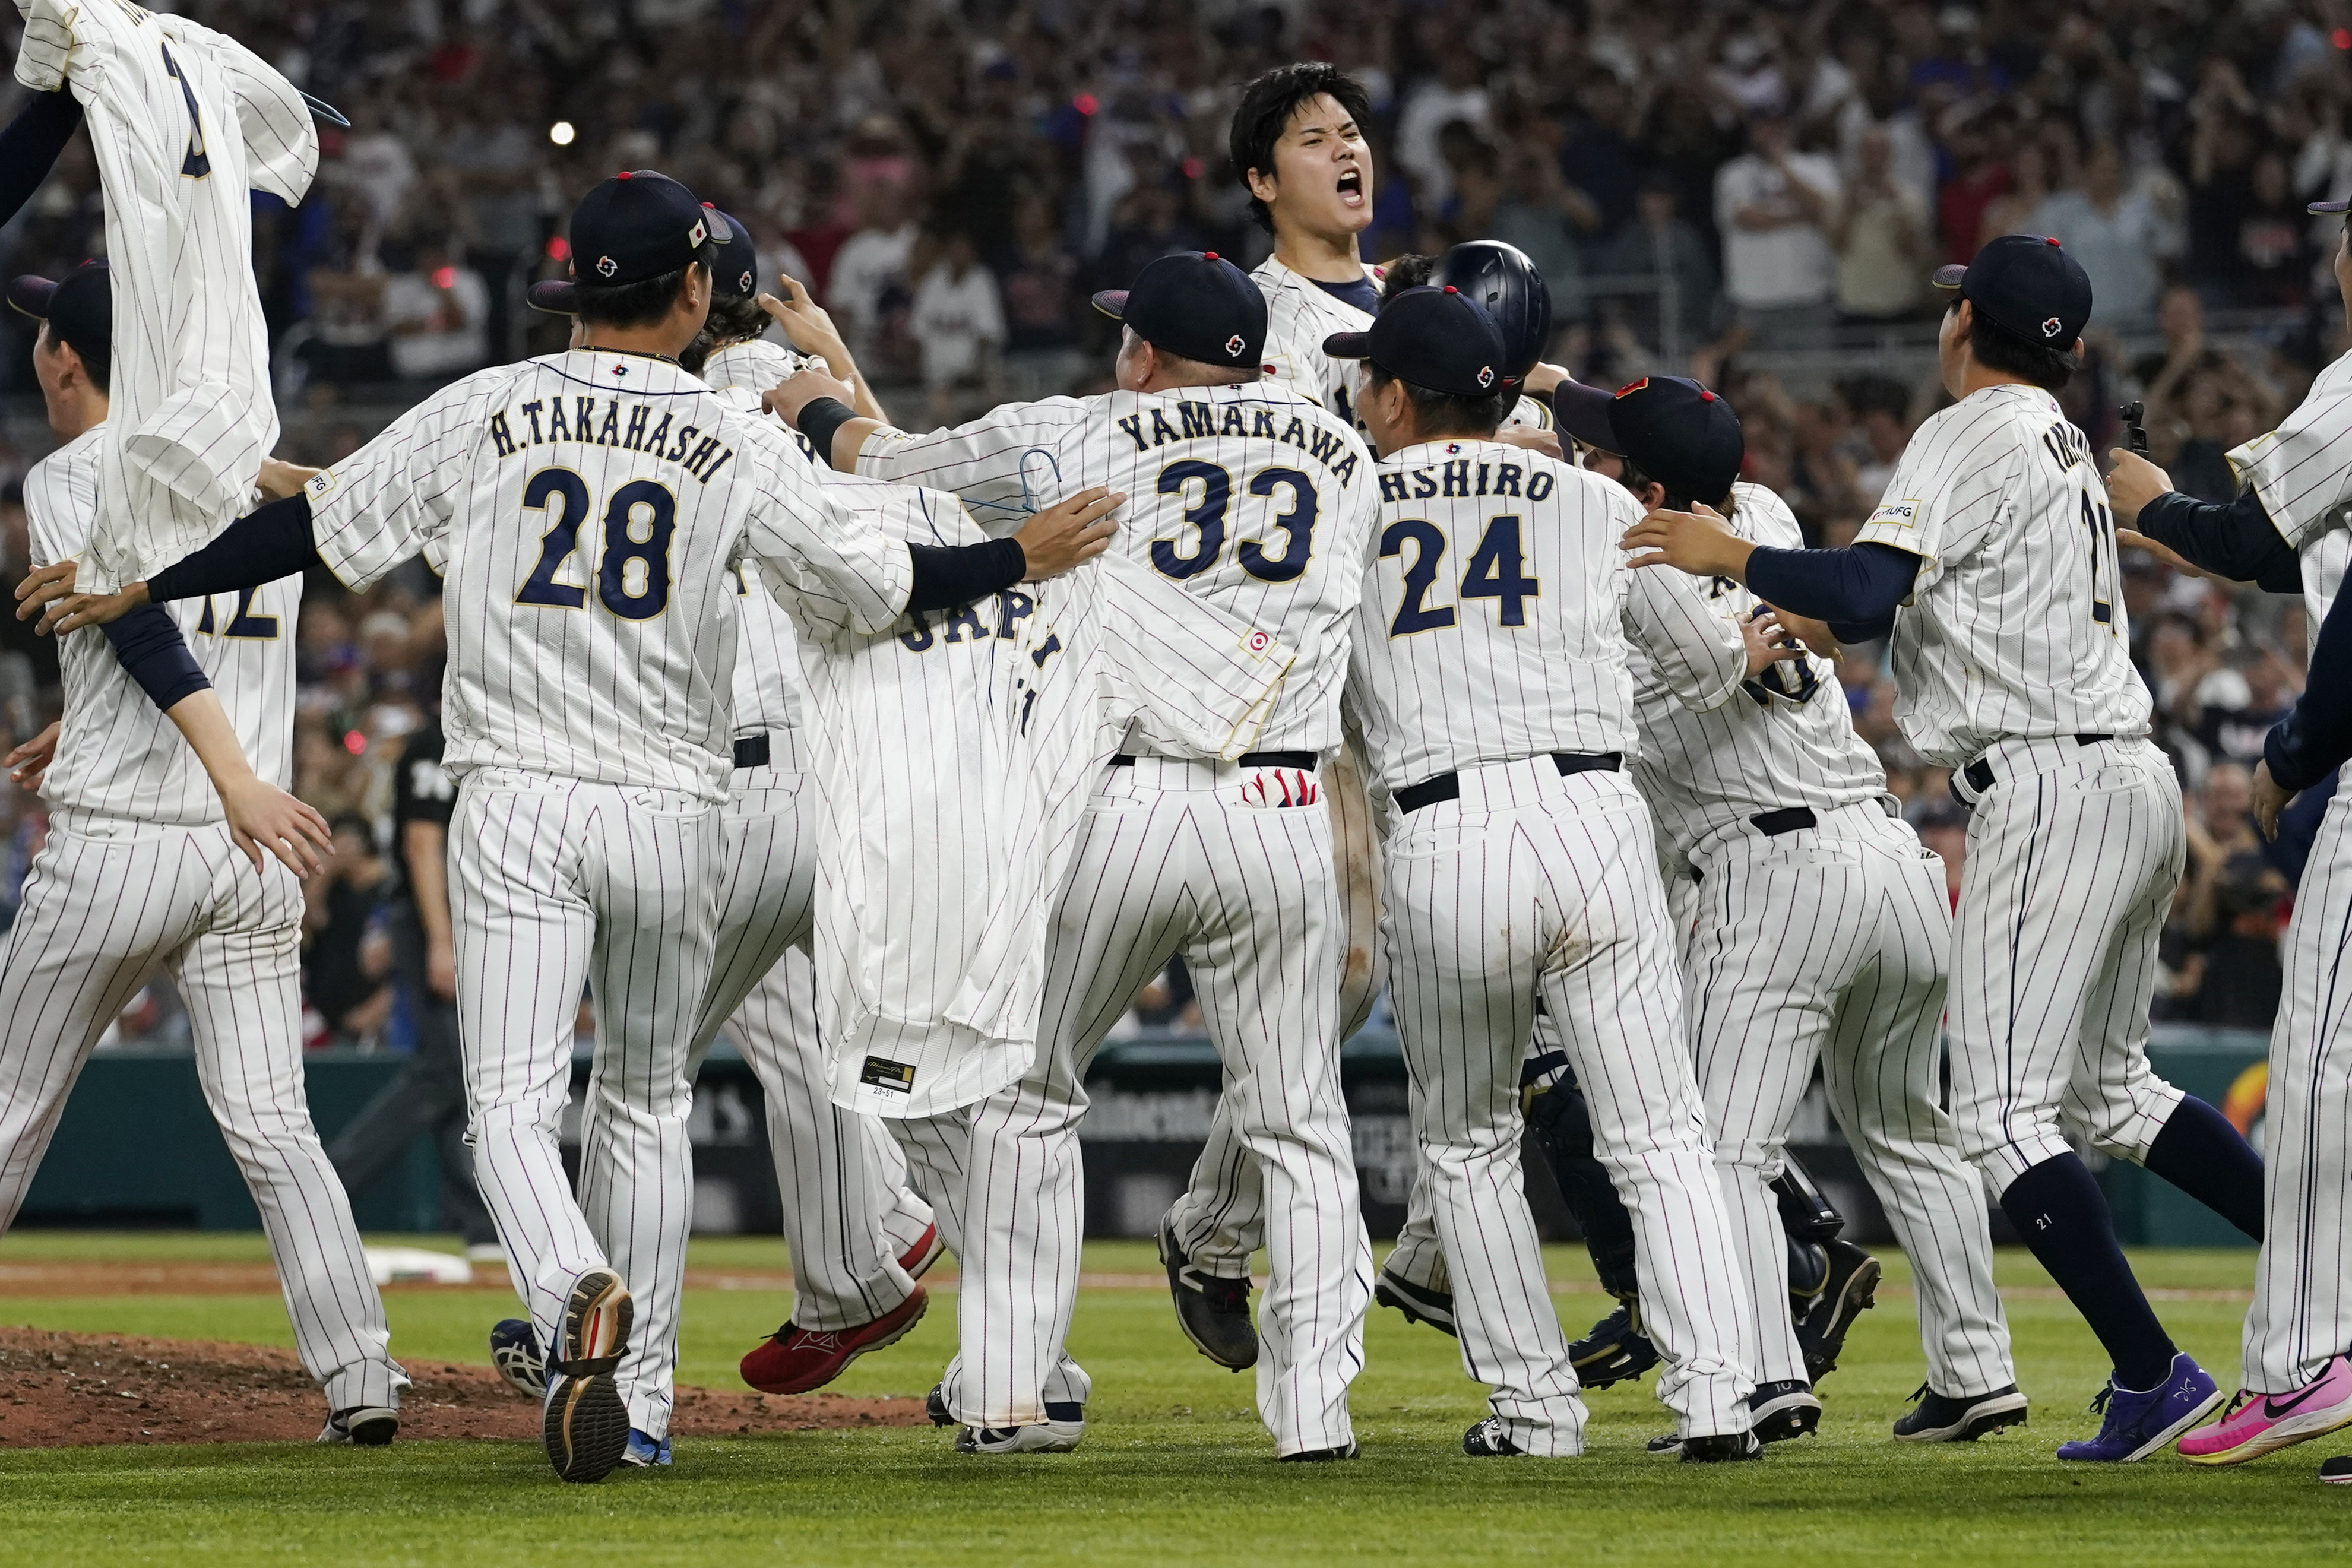 Japan's players celebrate their 3-2 victory over the United States in the final of the World Baseball Classic, Tuesday, March 21, 2023, in Miami.  (AP Photo/Marta Lavandier)